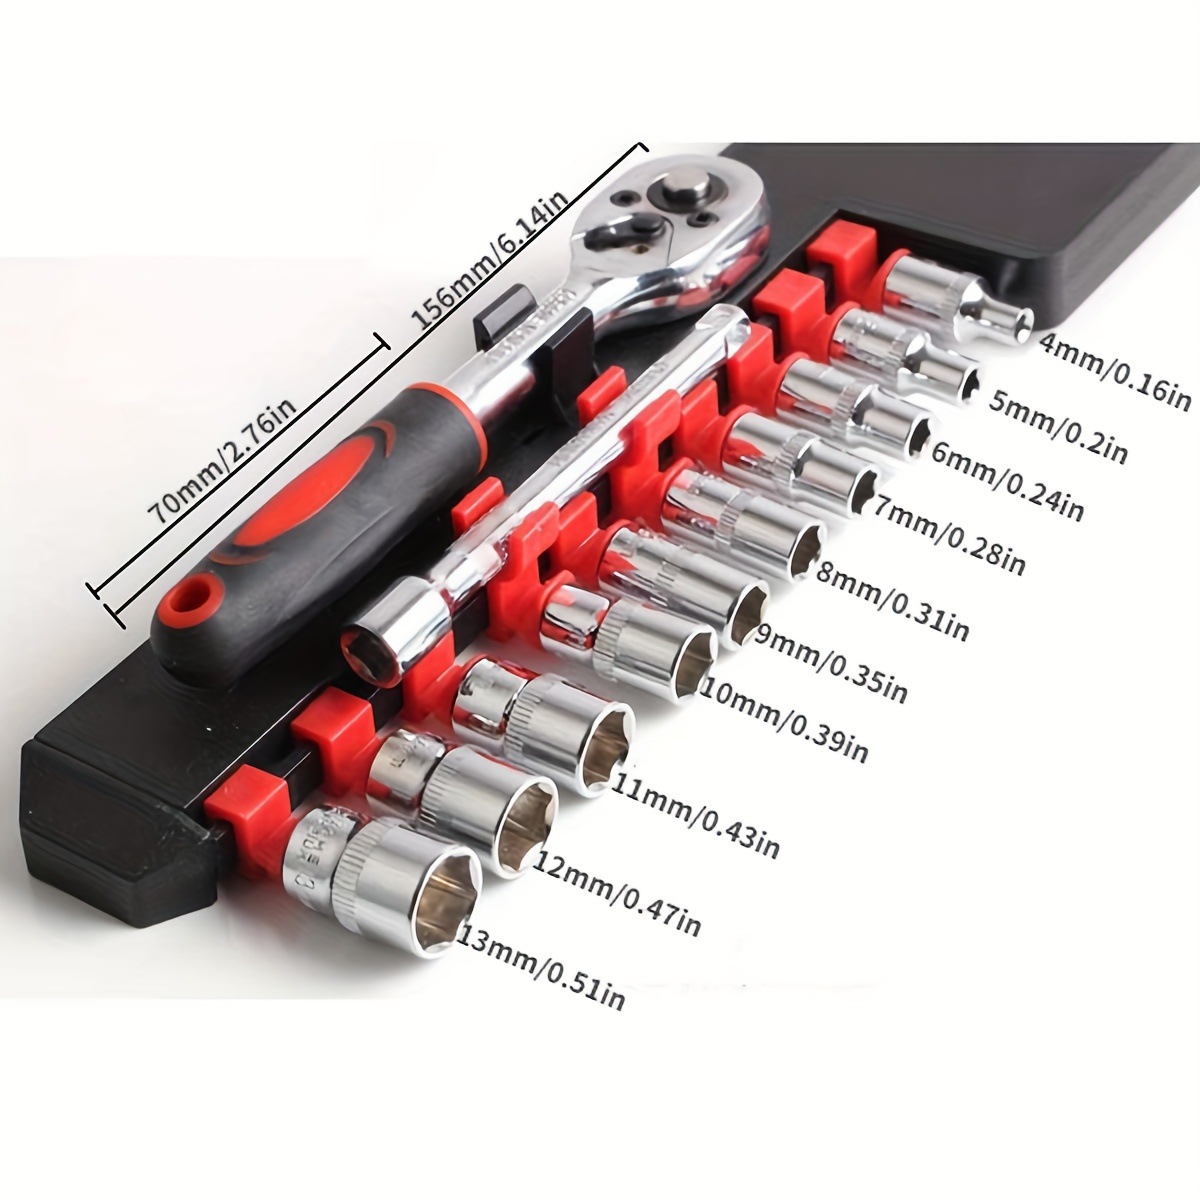 

Heavy-duty 1/4" Drive Socket Wrench Set - Carbon Steel, For Auto & Bike Repairs